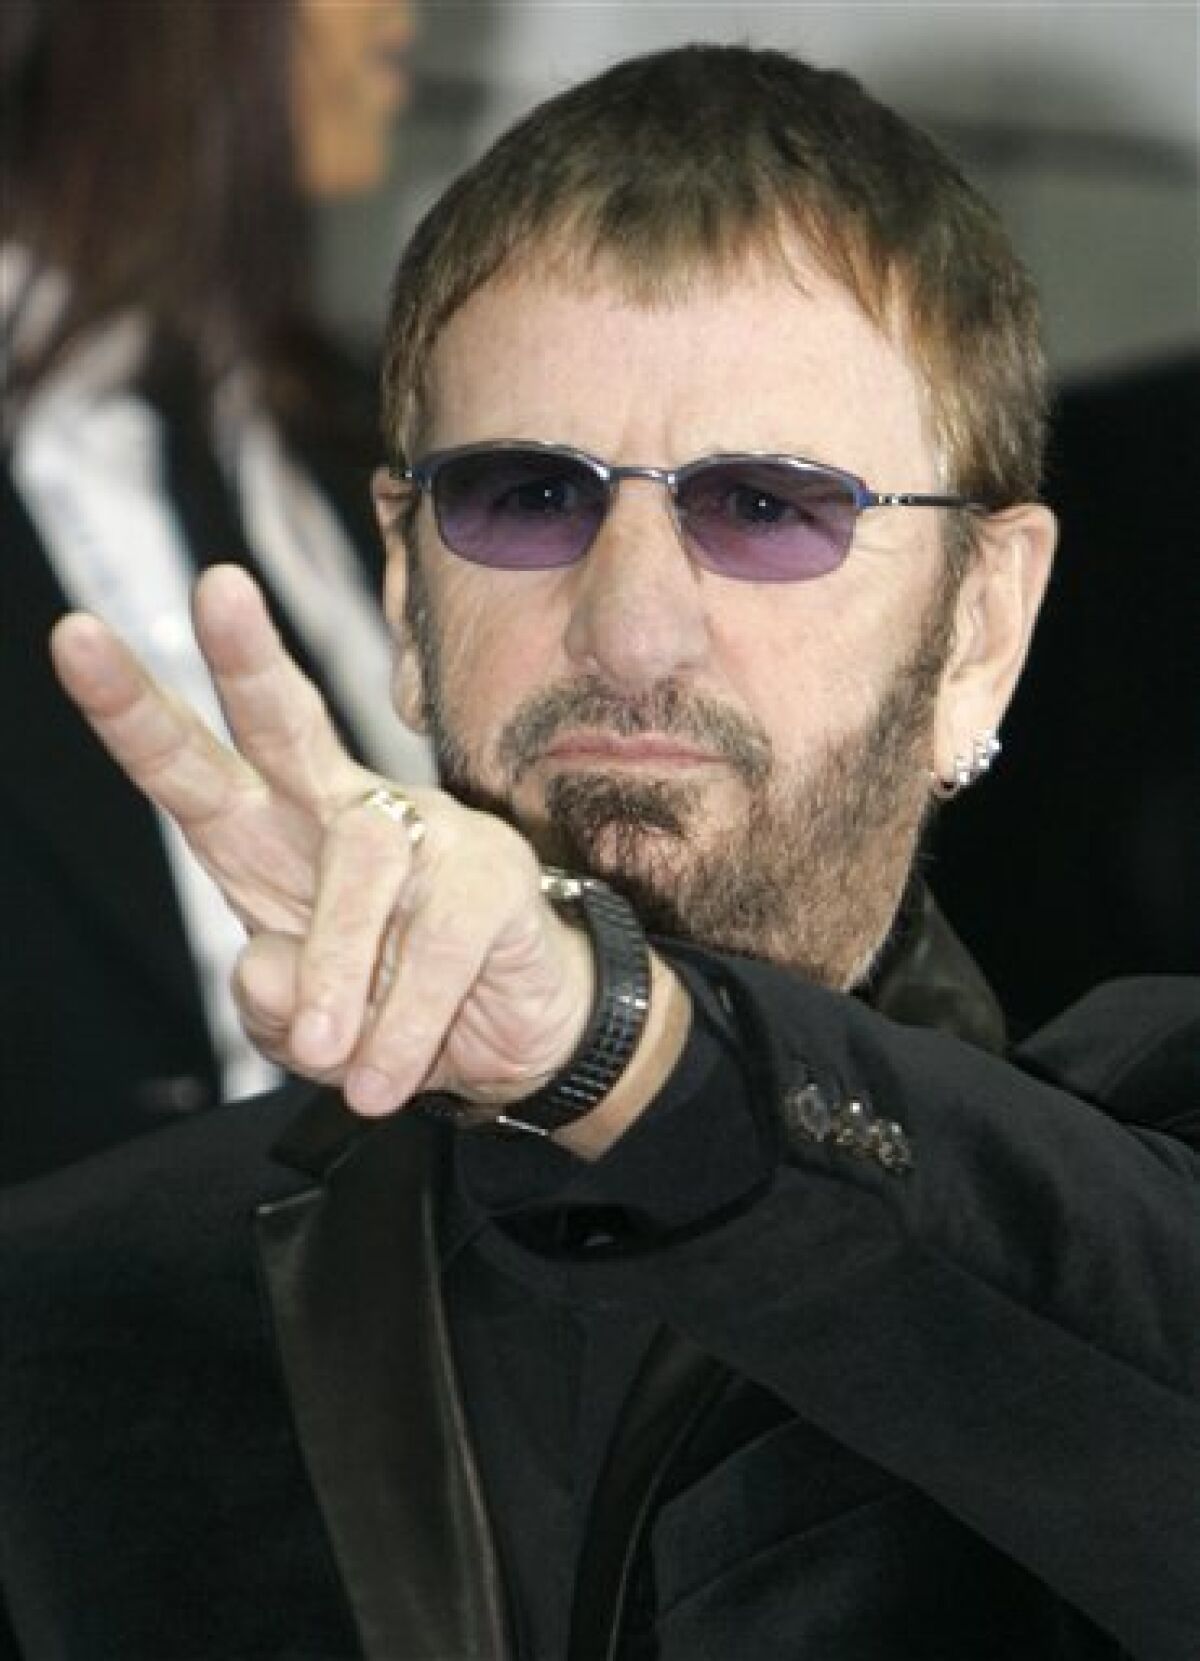 FILE - In this Nov.9, 2008 file photo, British singer Ringo Starr arrives at the 2008 World Music Awards ceremony in Monaco. In 2005, the Beatles’ Ringo Starr took up residency in Monaco, where he gets to keep a higher percentage of royalties than he would in Britain or Los Angeles. France’s tiny neighbor Monaco, with zero percent income tax for most people, has obvious appeal for the 72-year-old drummer and his estimated $240 million fortune.(AP Photo/Lionel Cironneau, File)